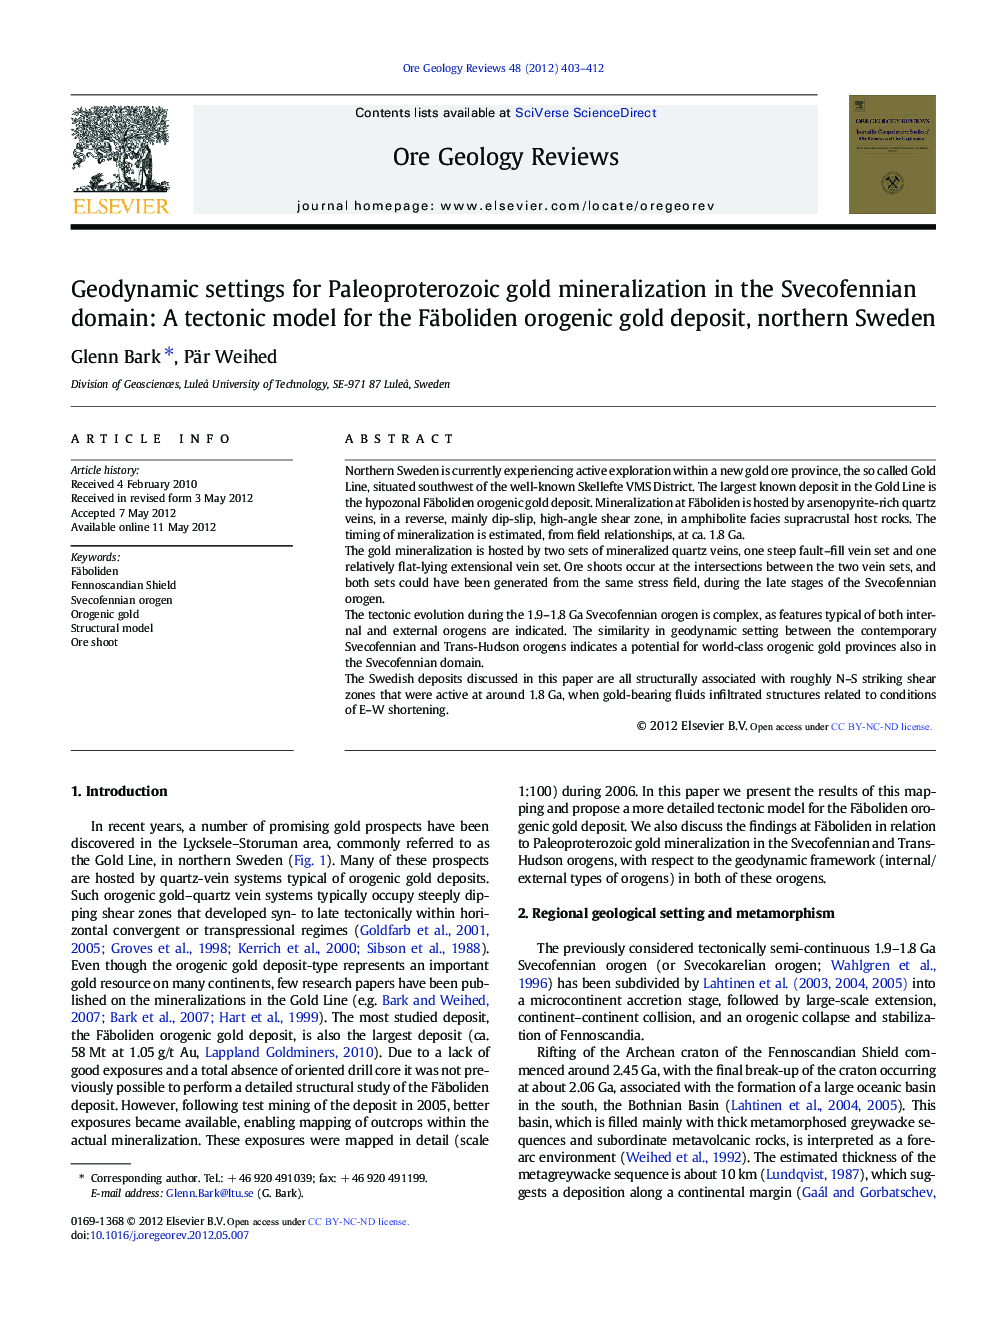 Geodynamic settings for Paleoproterozoic gold mineralization in the Svecofennian domain: A tectonic model for the Fäboliden orogenic gold deposit, northern Sweden